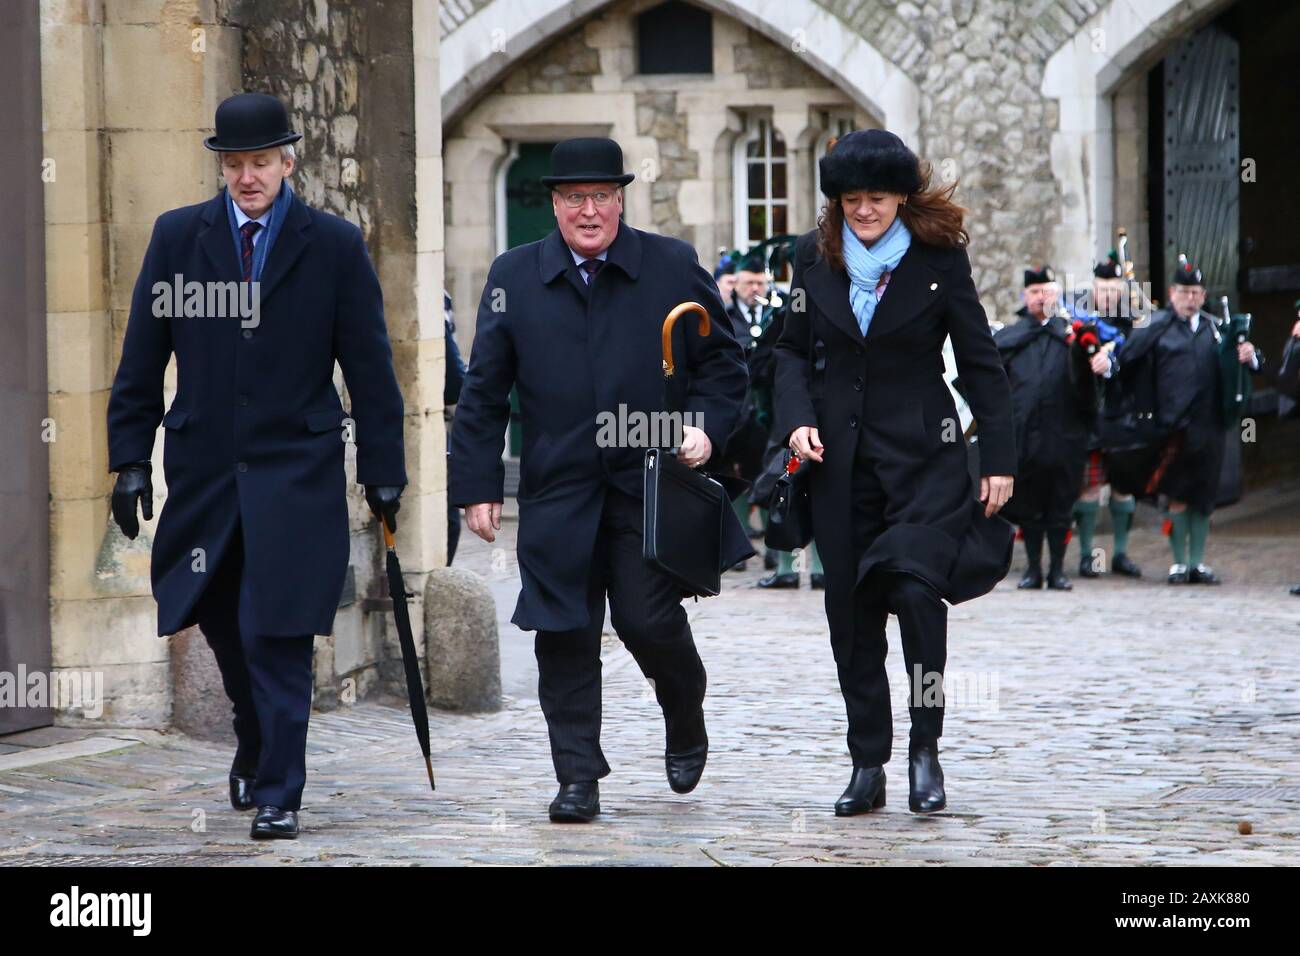 LONDON, ENGLAND. 09 FEBRUARY 2020: Major General Sir Benjamin John Bathurst KCVO CBE (L) Colonel Jeremy Green OBE (C) and Brigadier Vivienne Buck, Provost Marshal (Army) (R) at the Royal Military Police, parade alongside RMP veterans at The Tower of London, London, England. 09 February 2020 (Photo by Mitchell Gunn/Espa-Images) Stock Photo